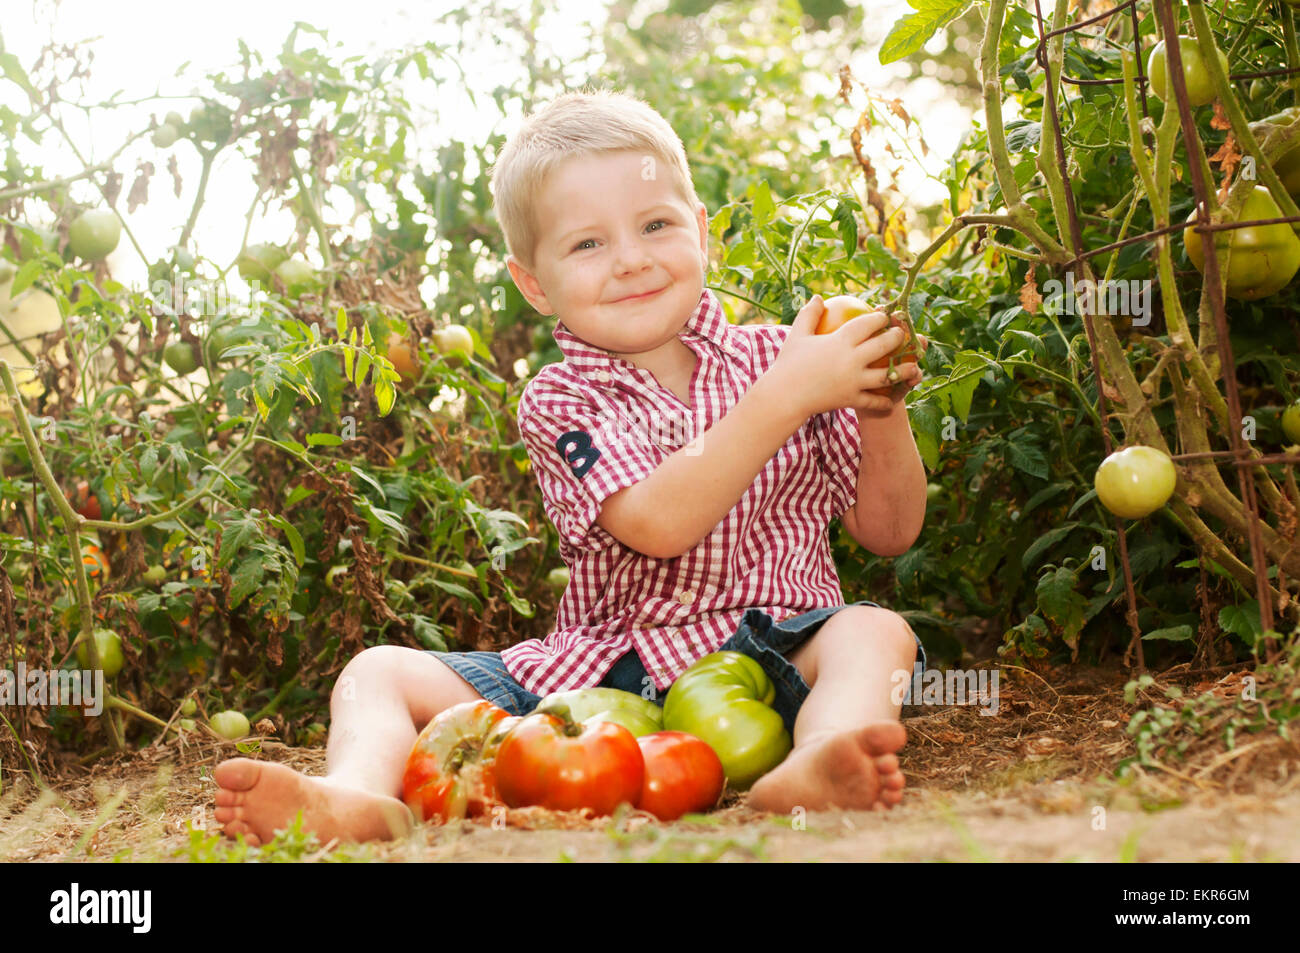 boy in homegrown garden picking and collecting heirloom tomatoes Stock Photo